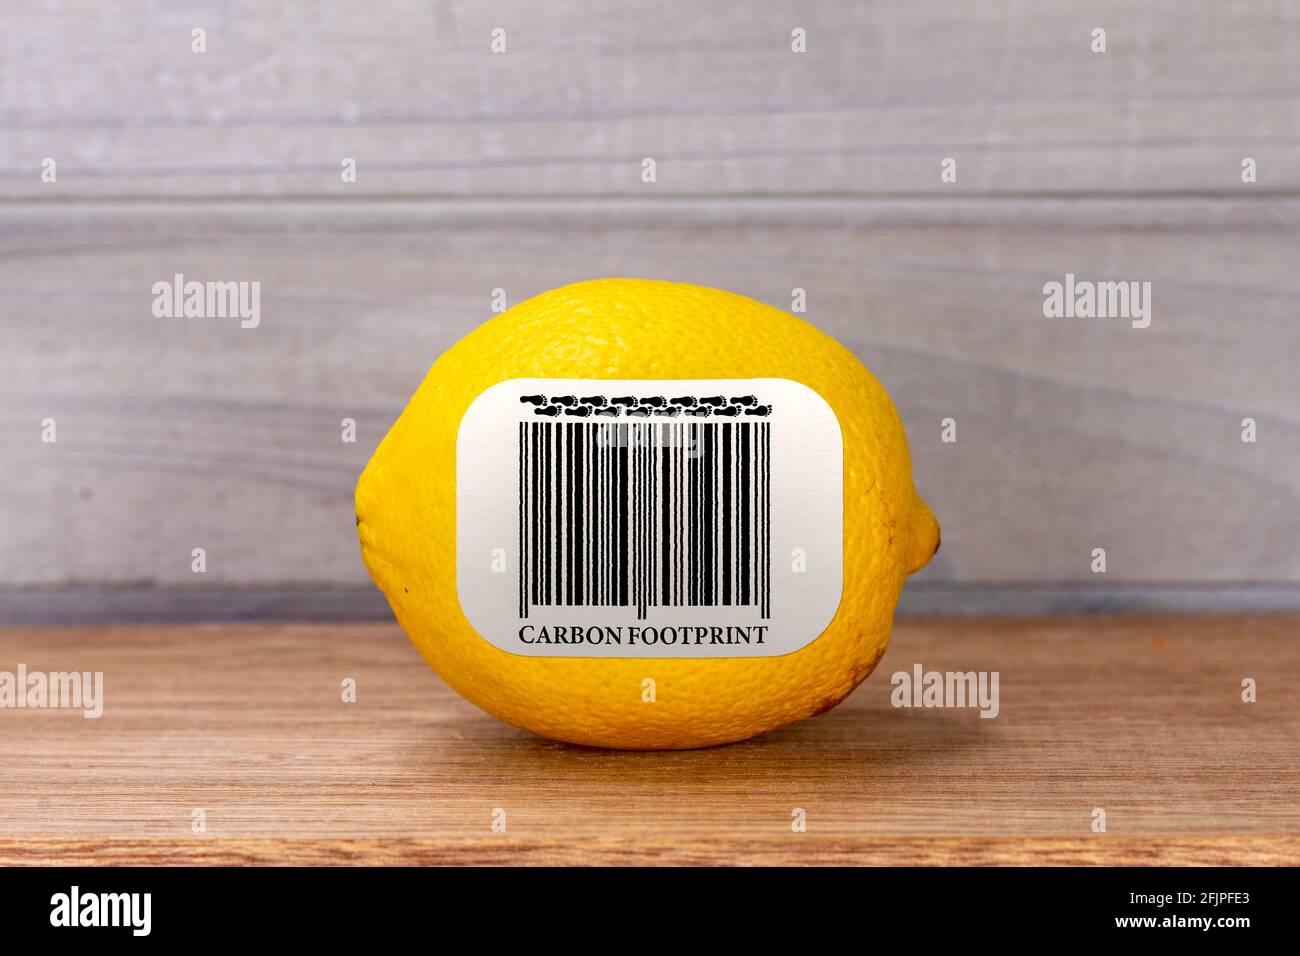 Carbon Footprint barcode label on lemon, environmental impact sustainability label on food Stock Photo